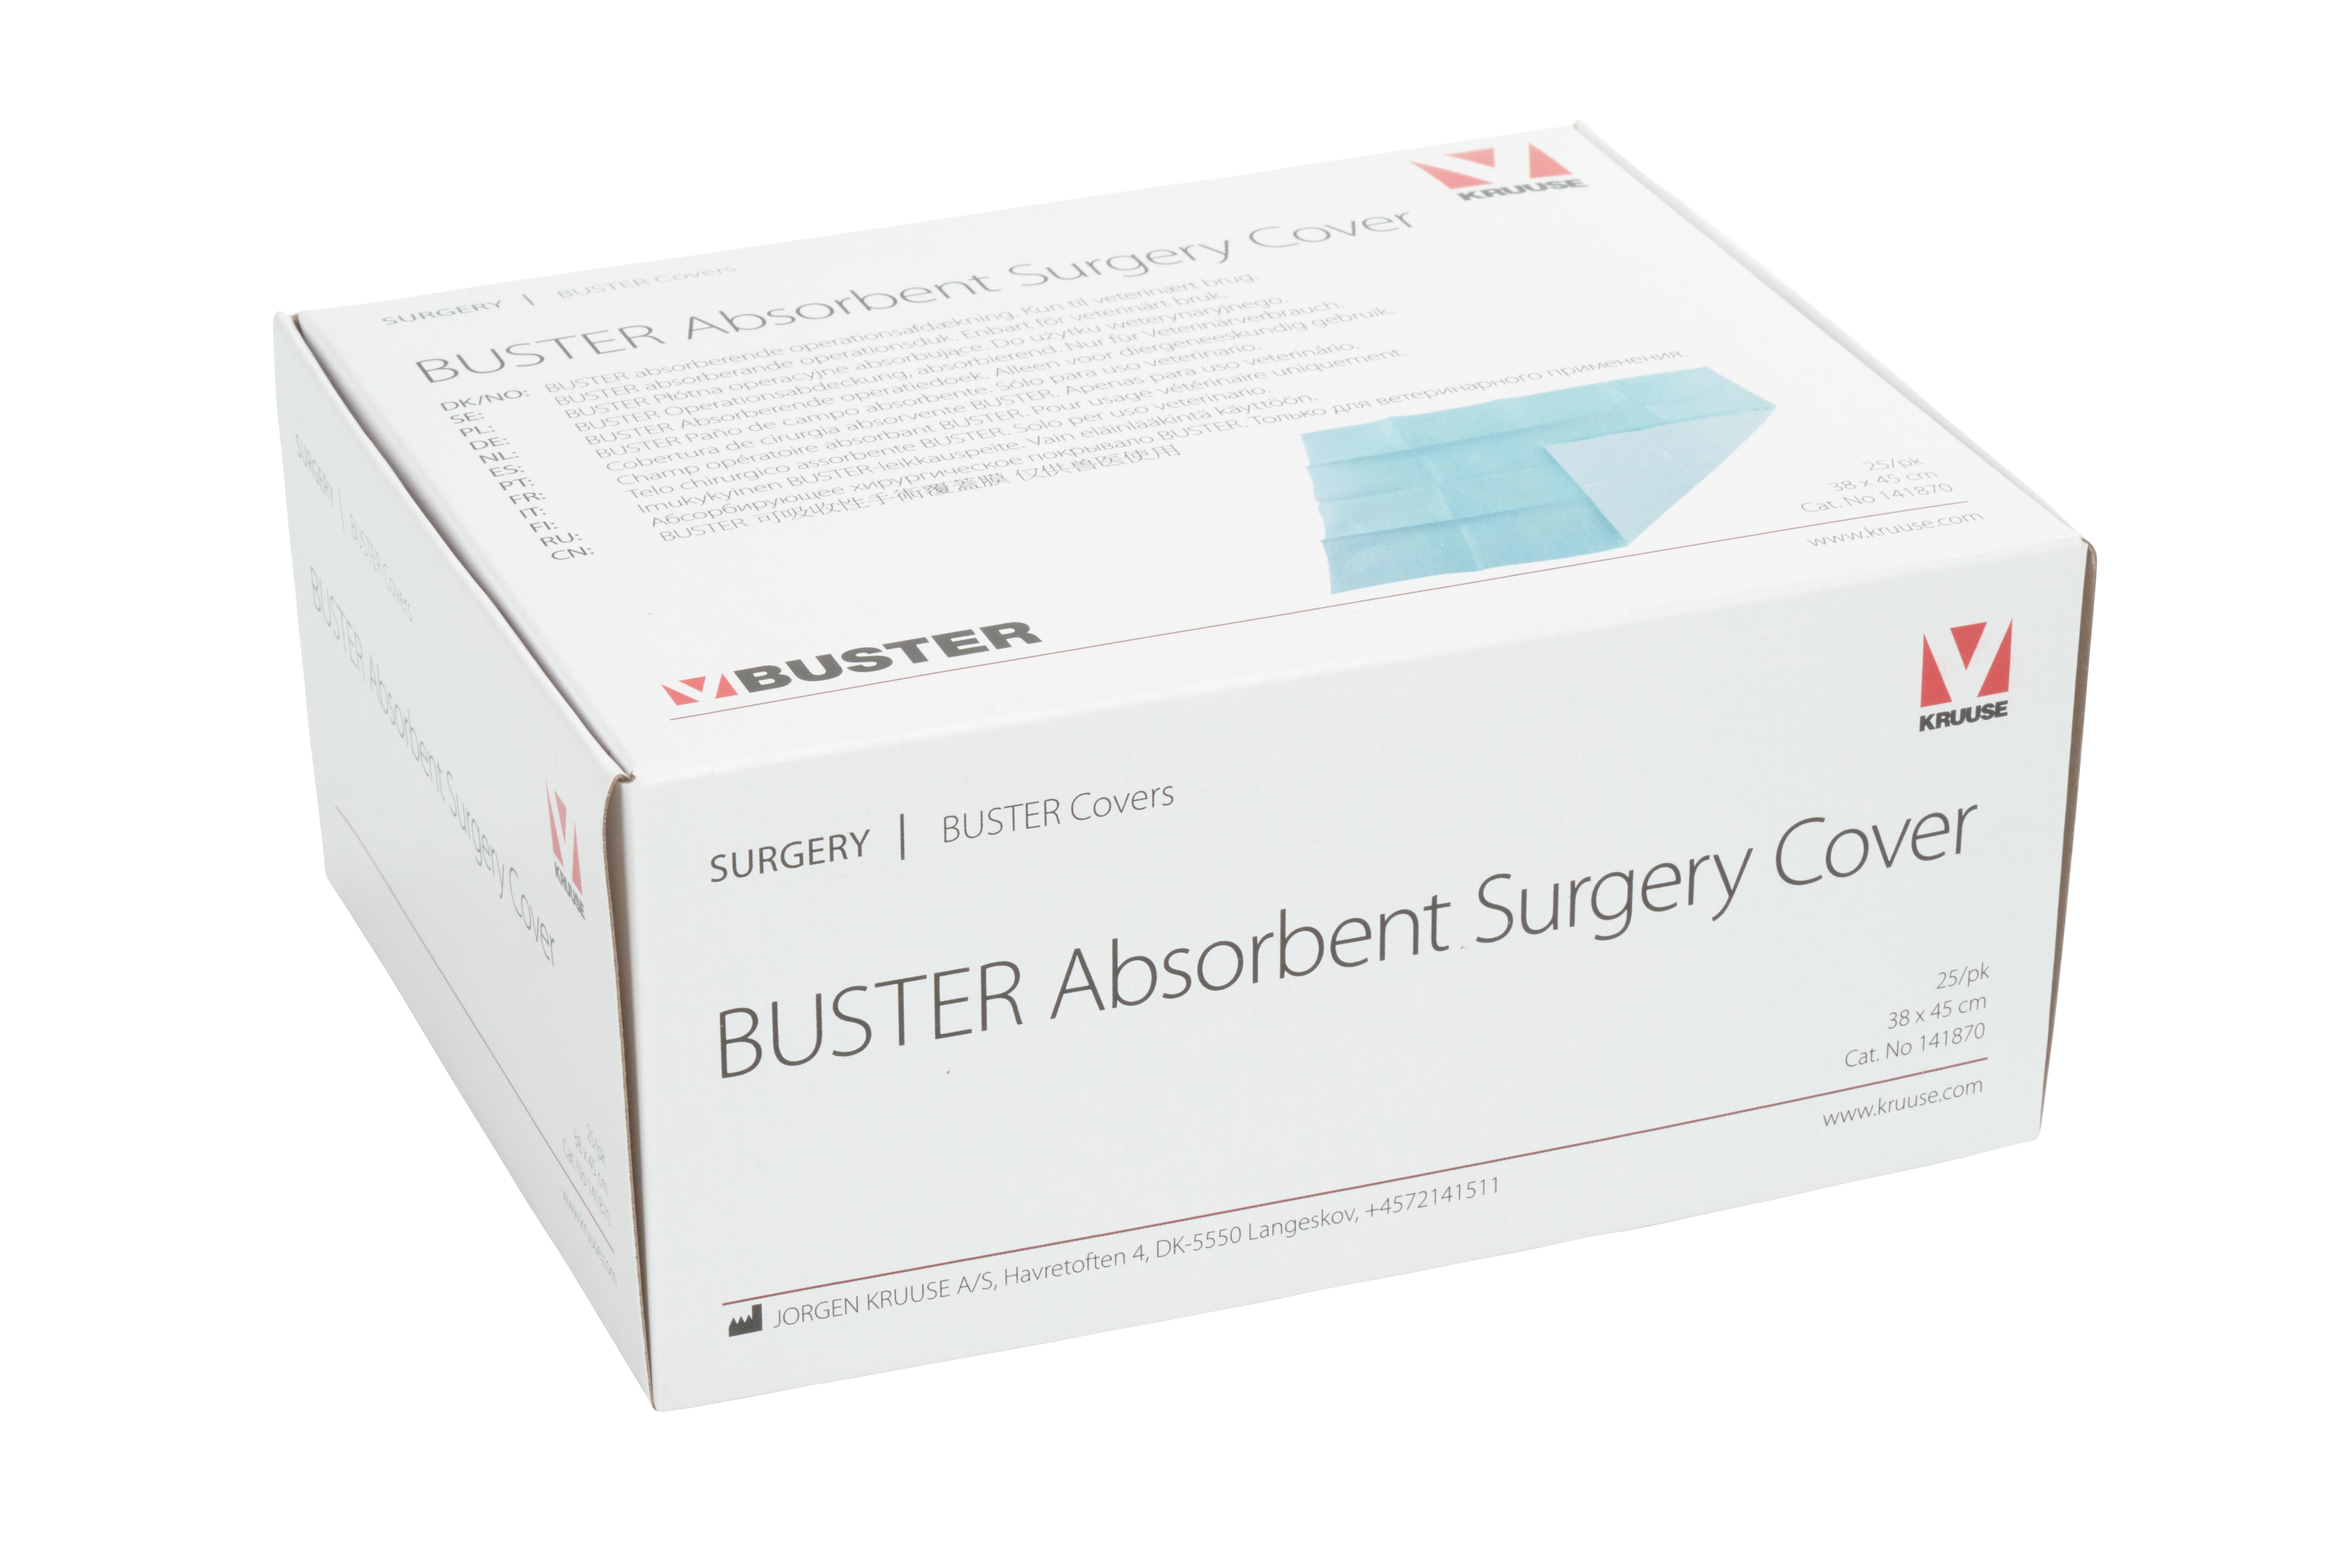 BUSTER Absorbent Surgery Cover 38x45 cm, 25/pk